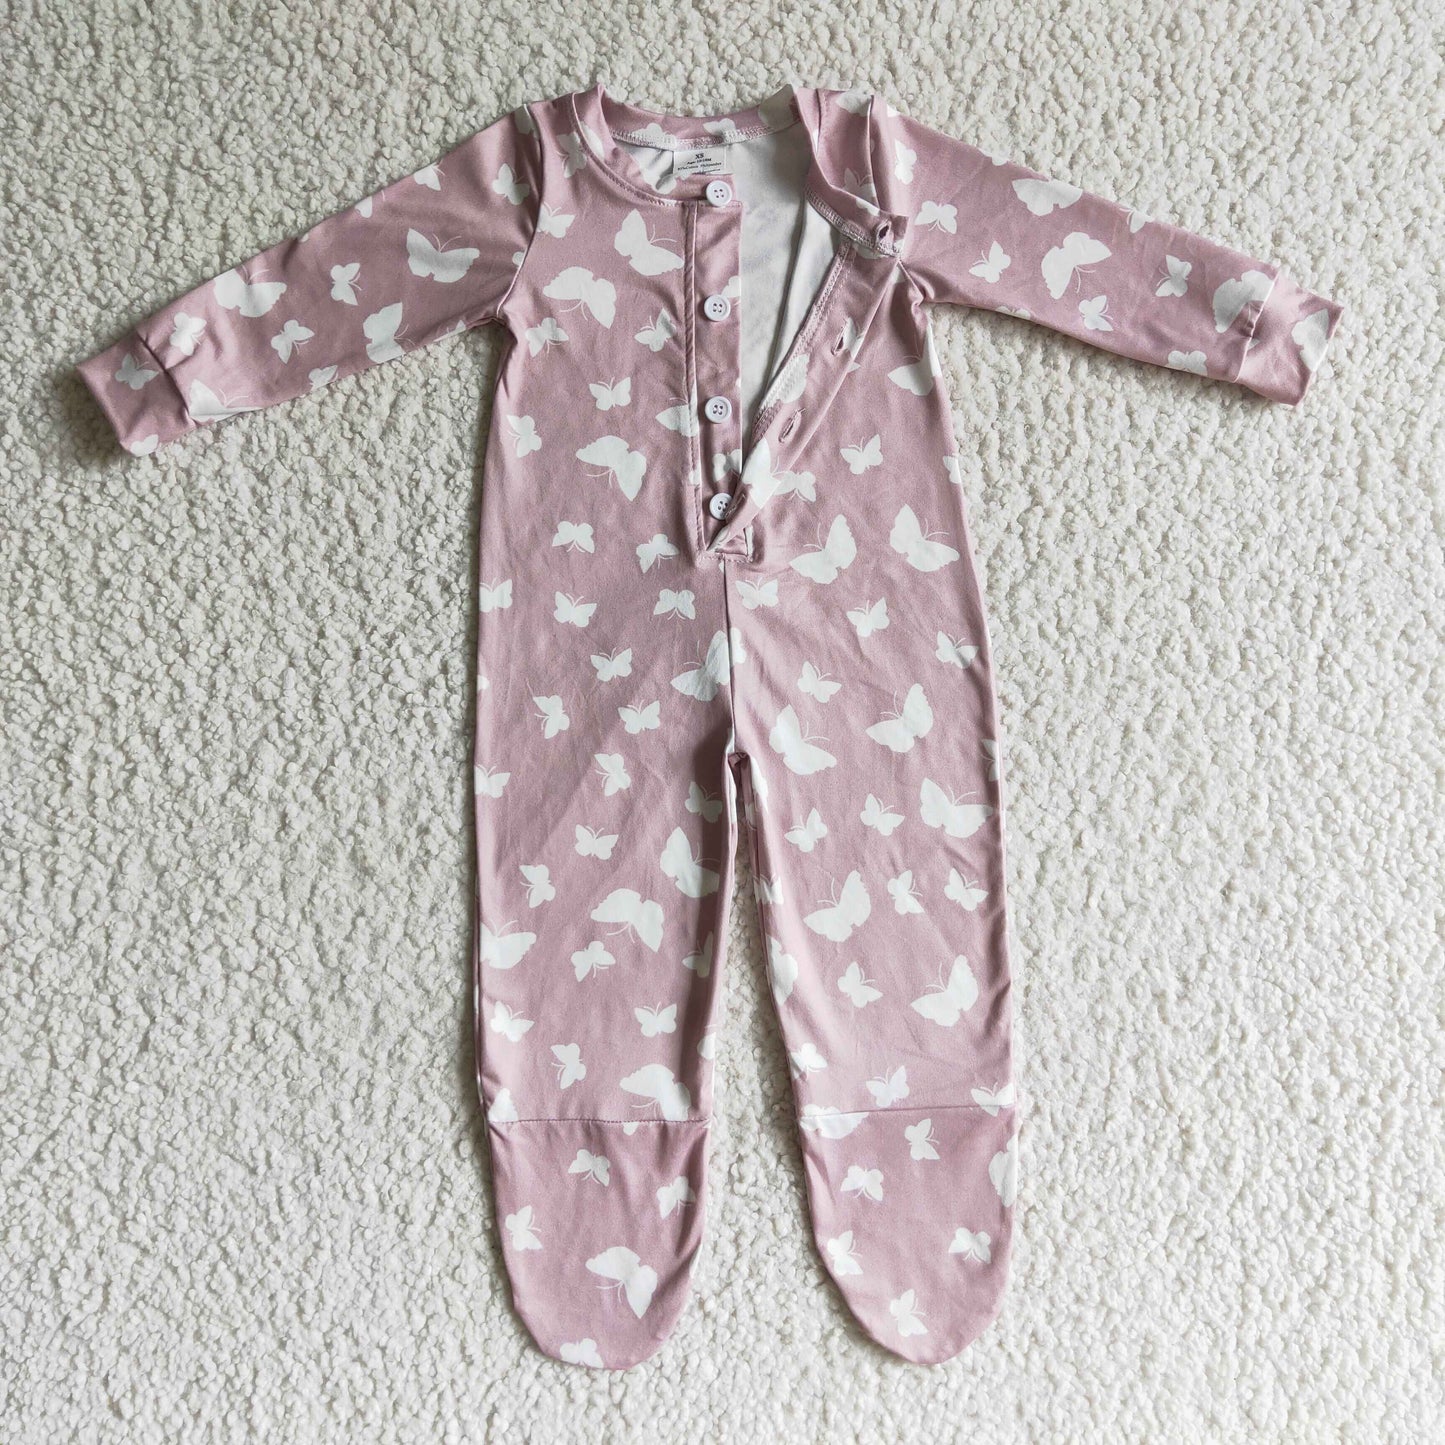 Baby girls FOOTED fall romper      LR0118